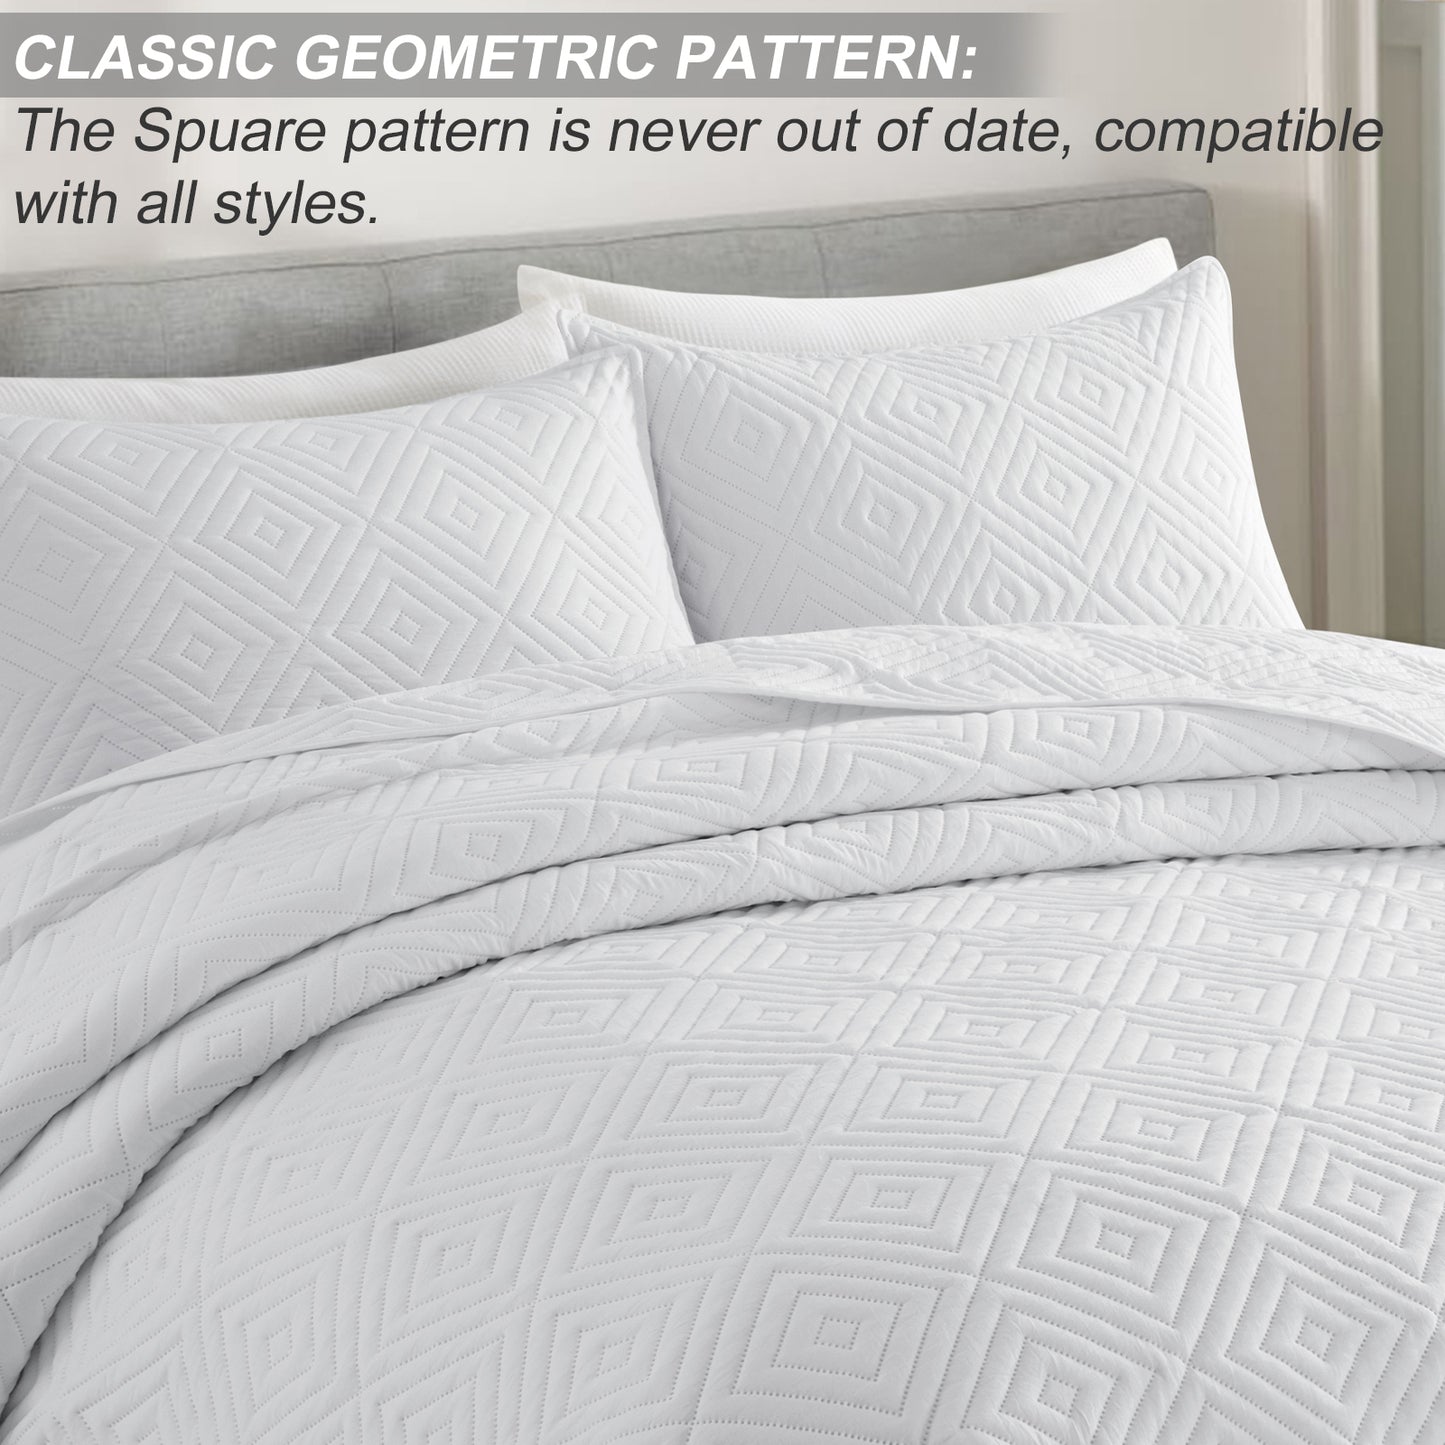 Exclusivo Mezcla 2-Piece White Twin Size Quilt Set, Square Pattern Ultrasonic Lightweight and Soft Quilts/Bedspreads/Coverlets/Bedding Set (1 Quilt, 1 Pillow Sham) for All Seasons